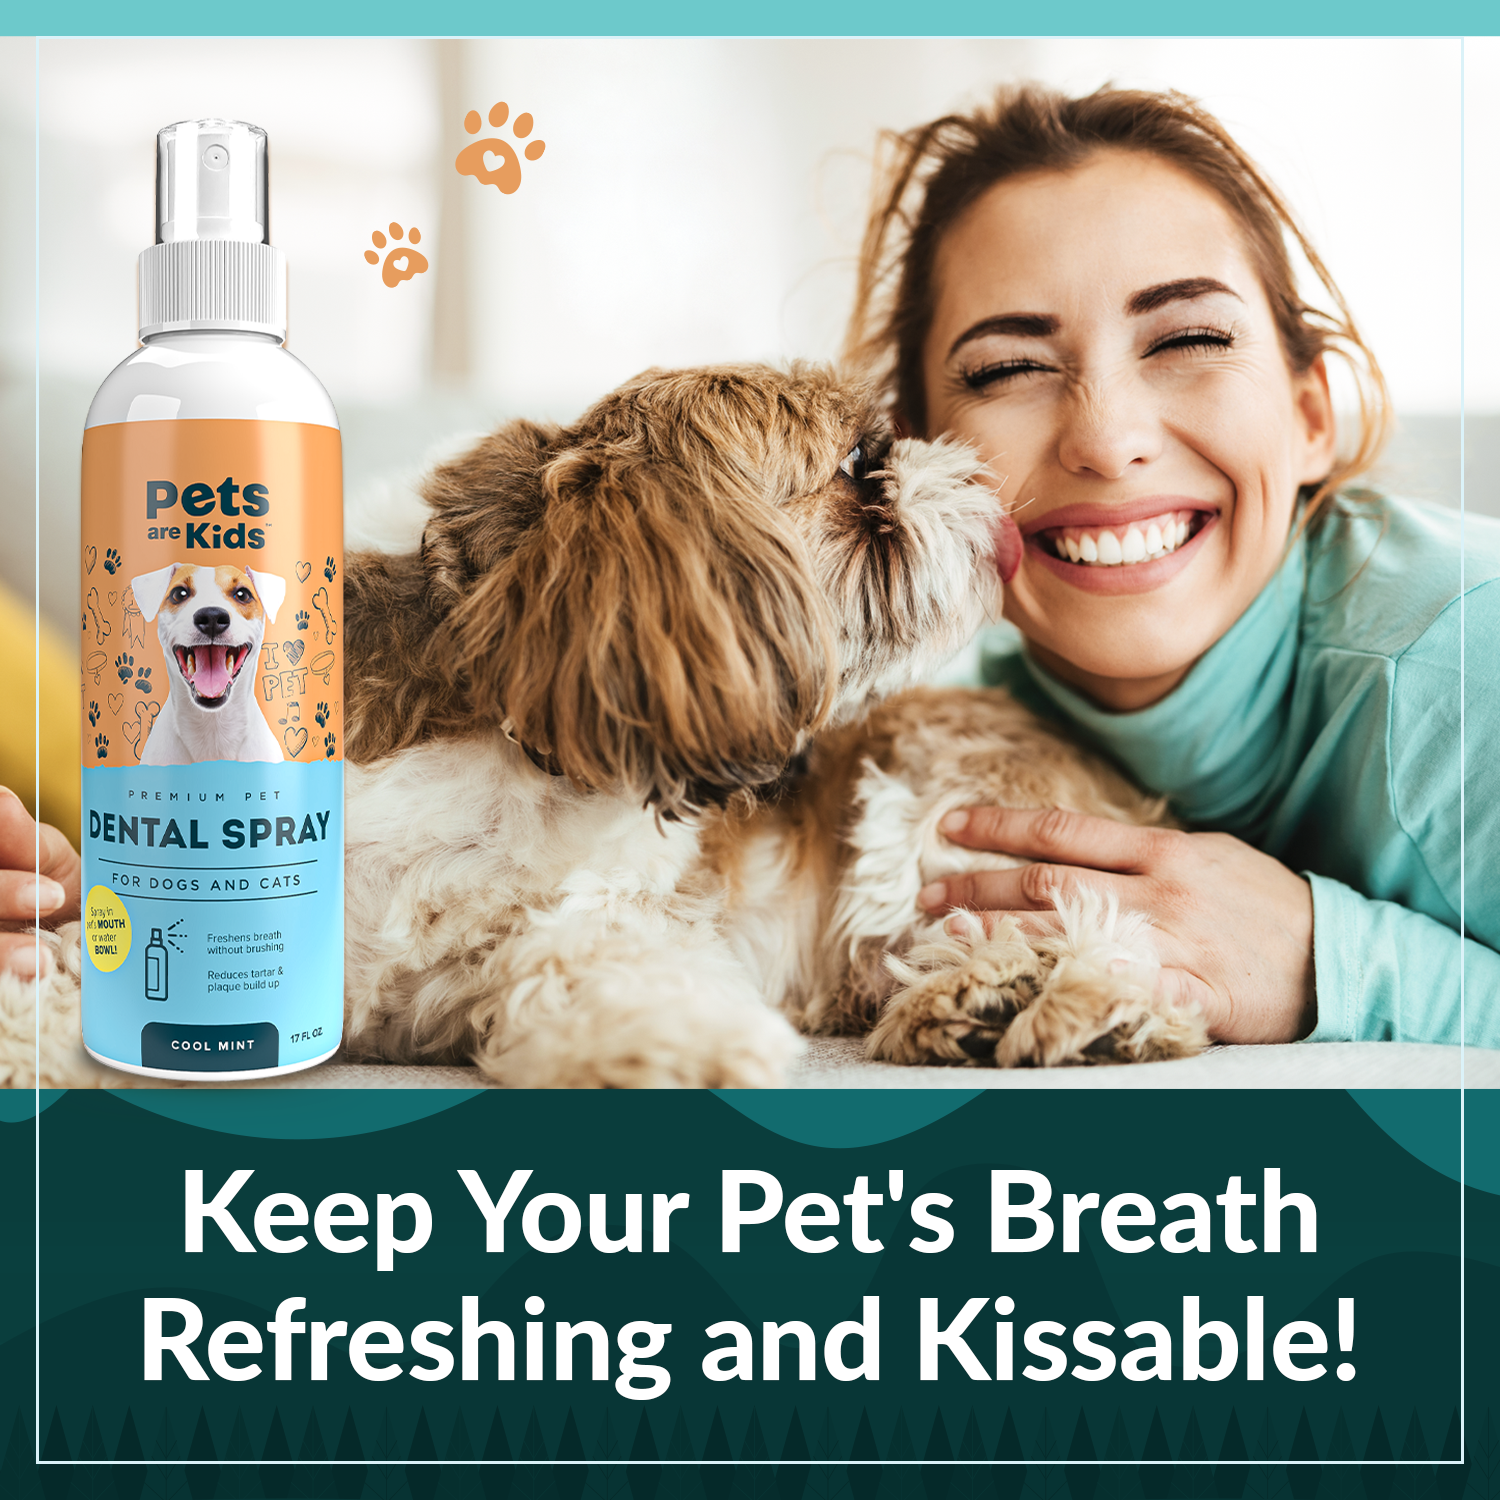 Keep your pet's breath refreshing and kissable